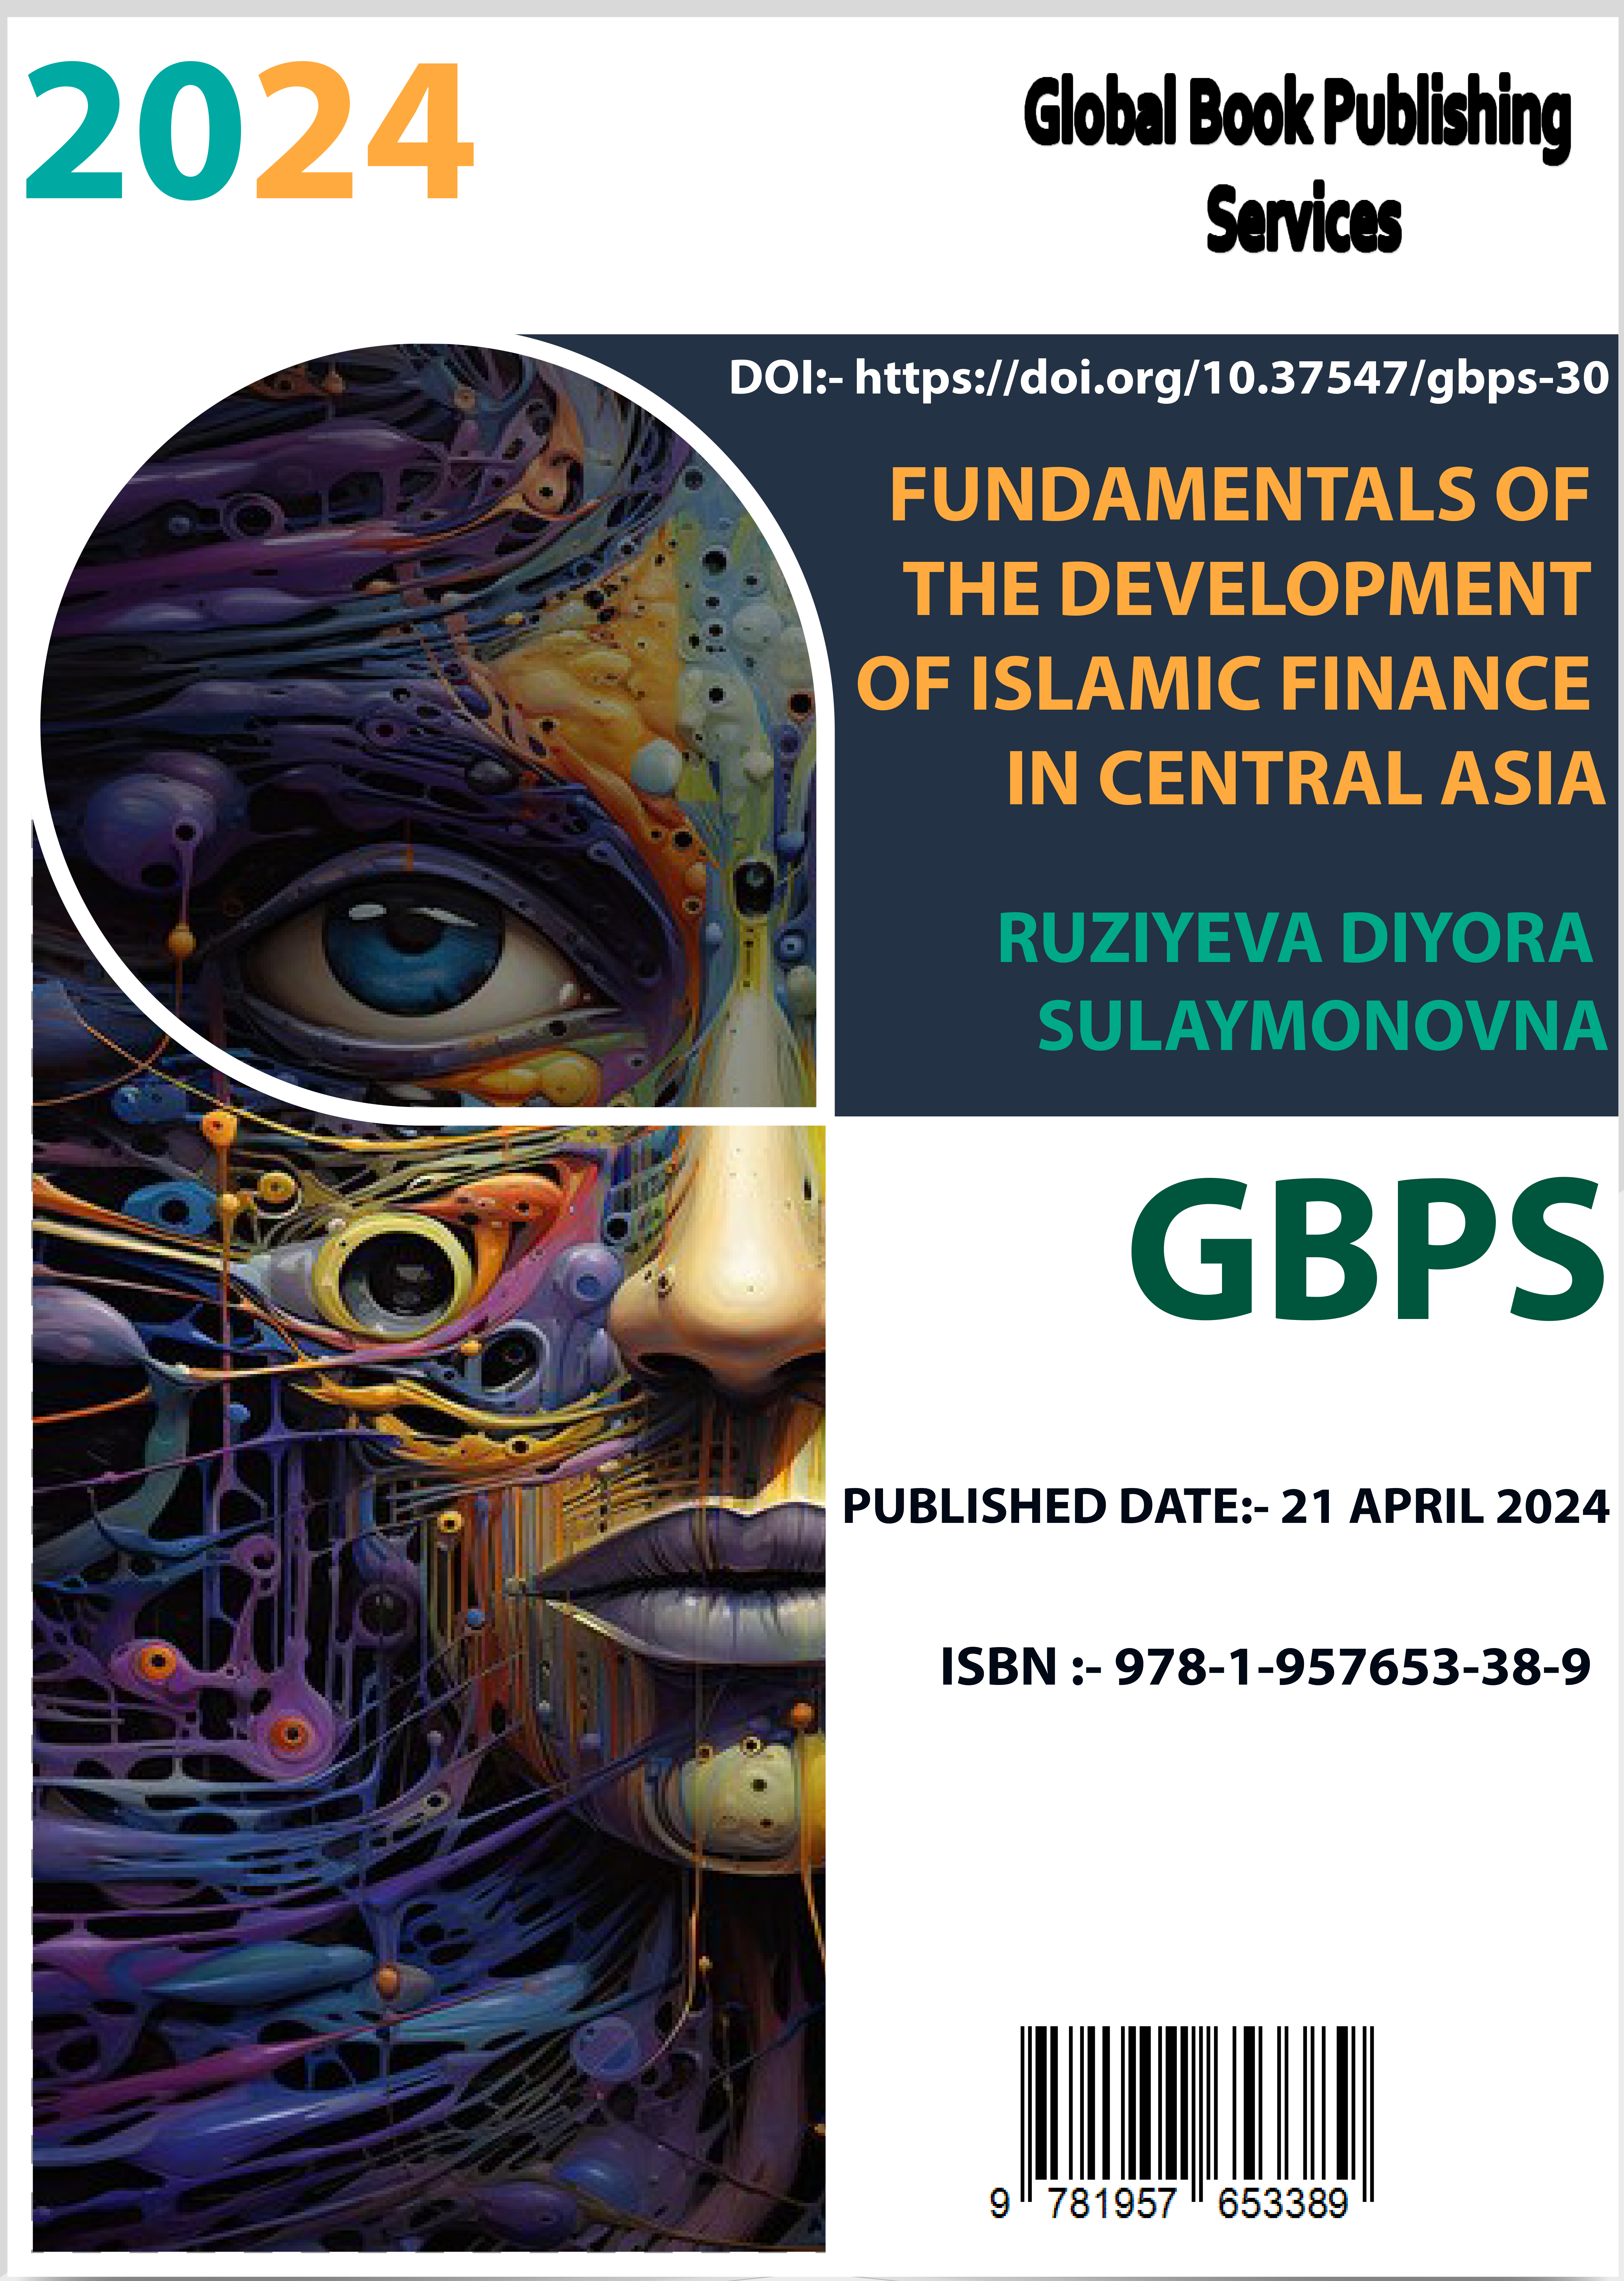 					View 2024: FUNDAMENTALS OF THE  DEVELOPMENT OF ISLAMIC  FINANCE IN CENTRAL ASIA
				